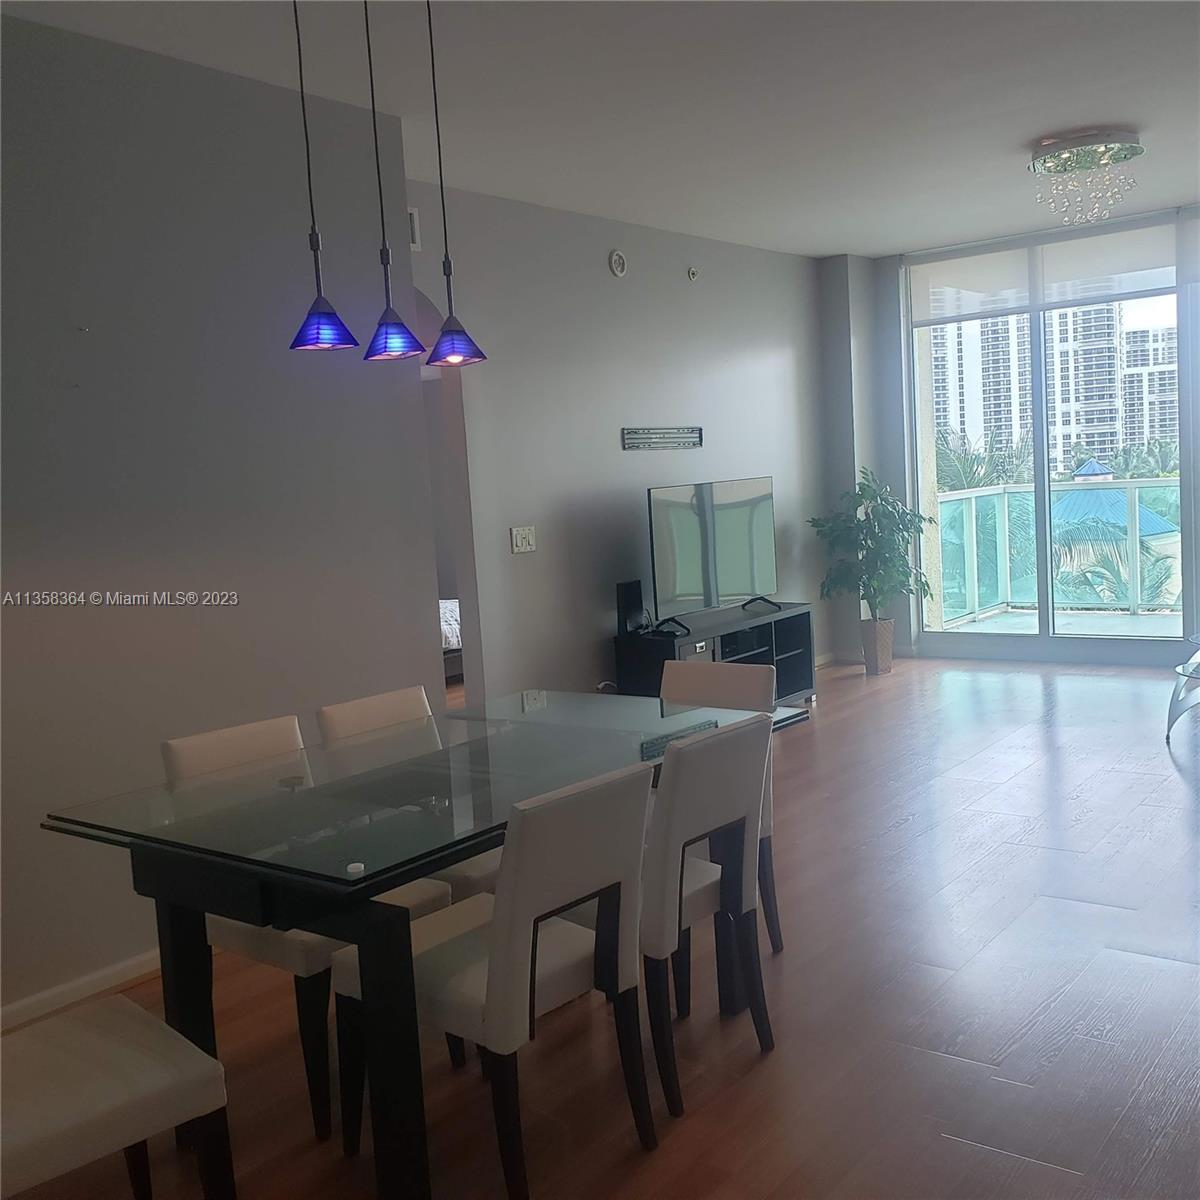 Beautiful 2 bedroom apartment in Aventura , Intracoastal view and all the building in Sunny Isles. W